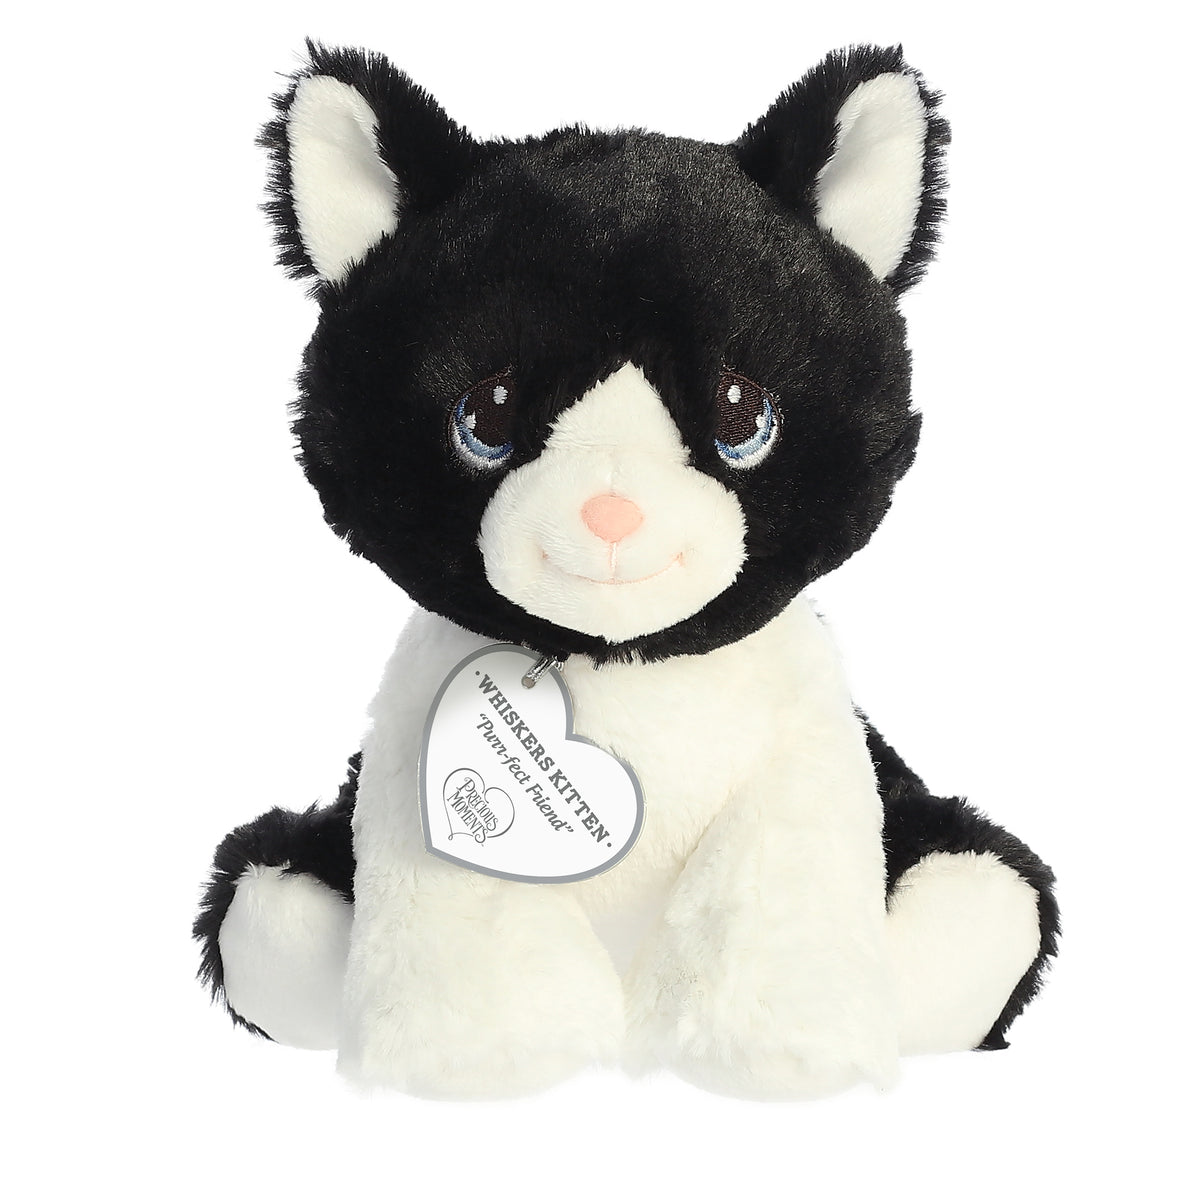 A sitting-down black and white kitten plush with tear-drop eyes and a precious moments inspirational tag around its neck.